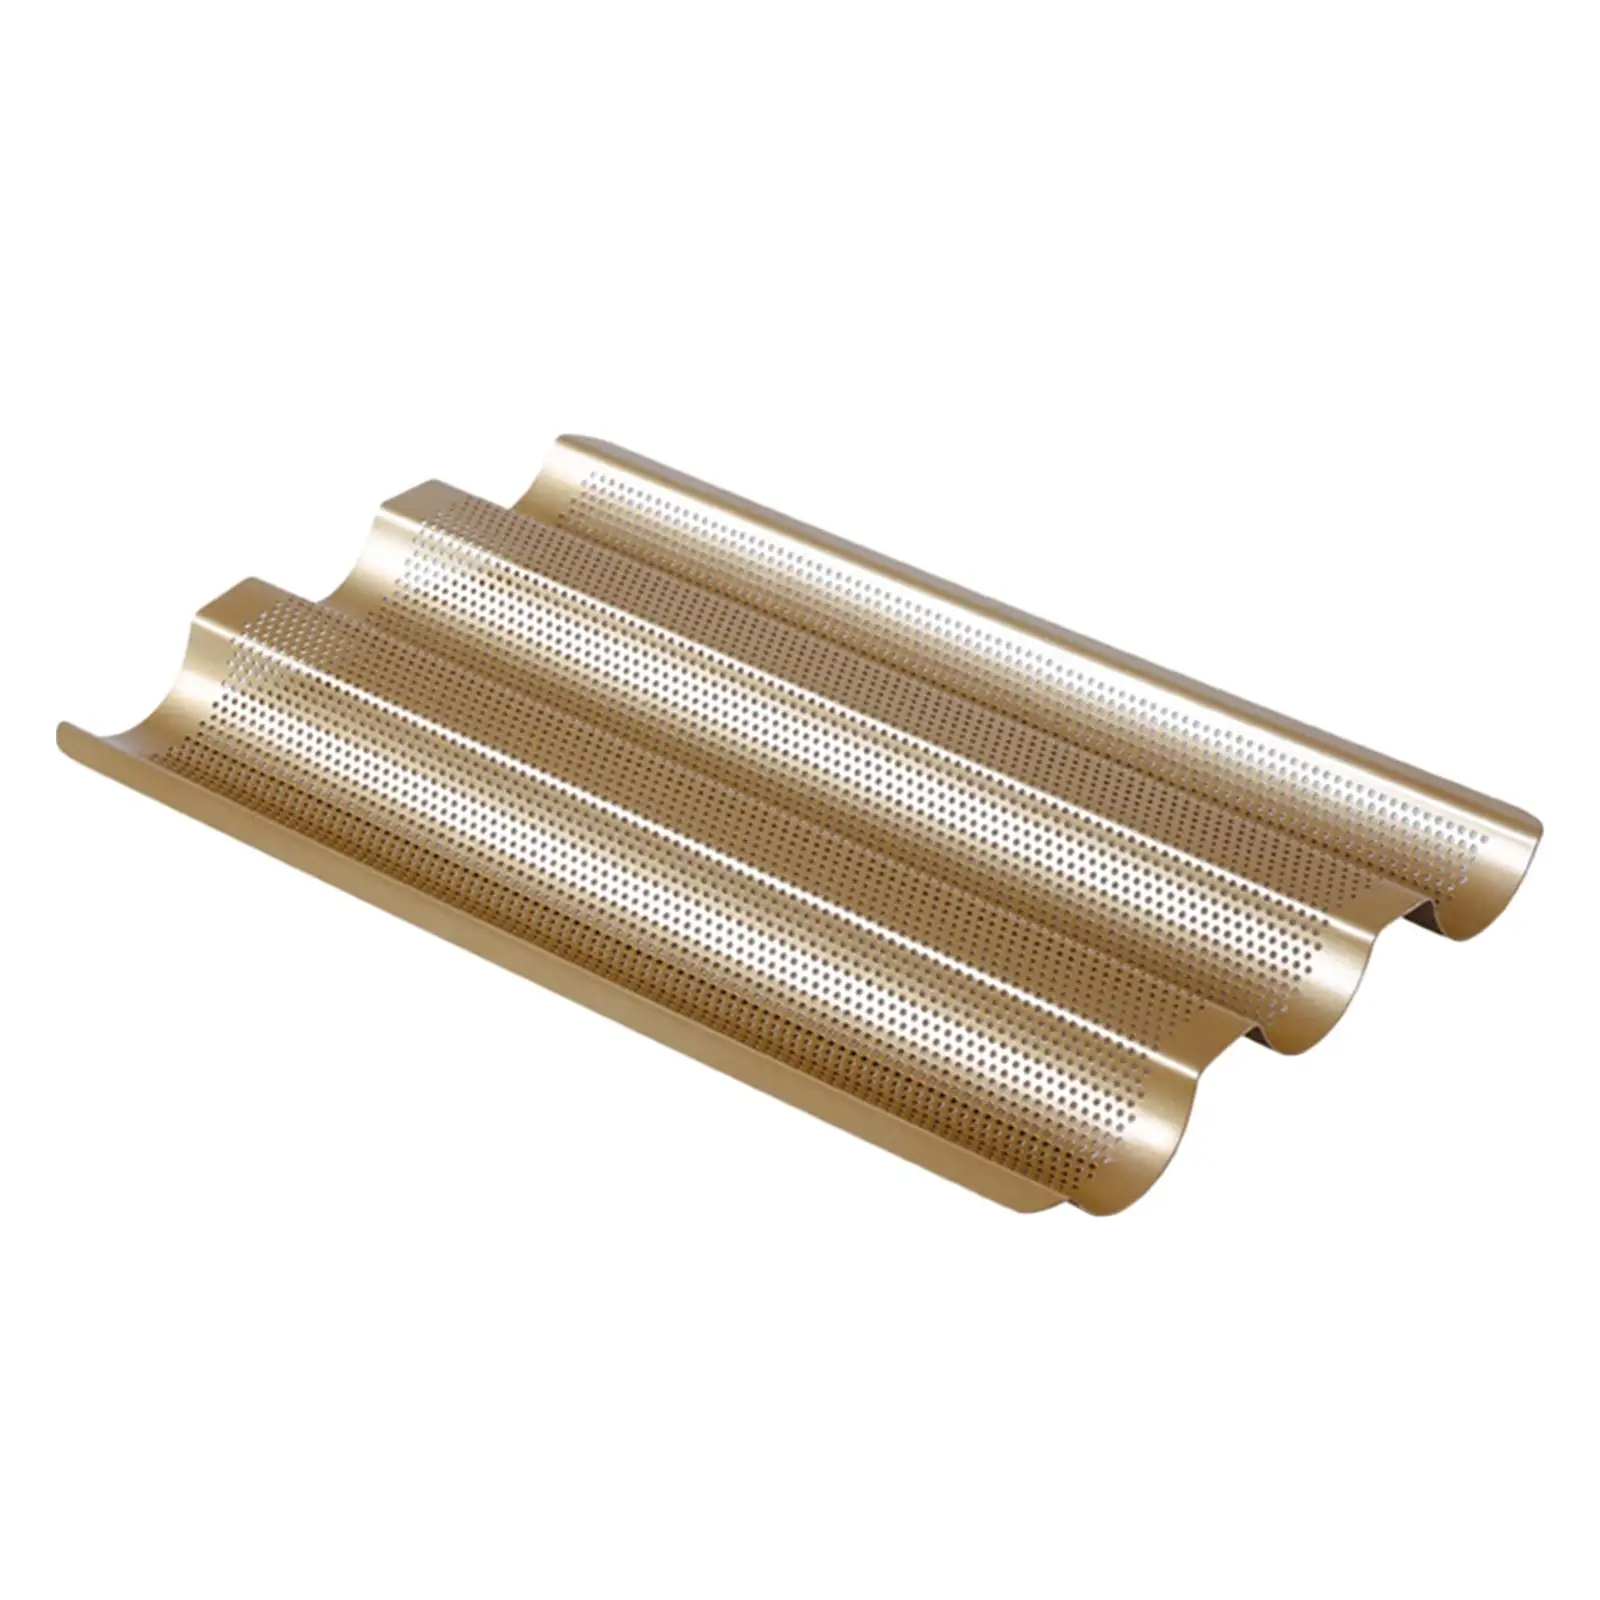 Baguettes Baking Tray for Bakery Baking Loaf Bread Accessories